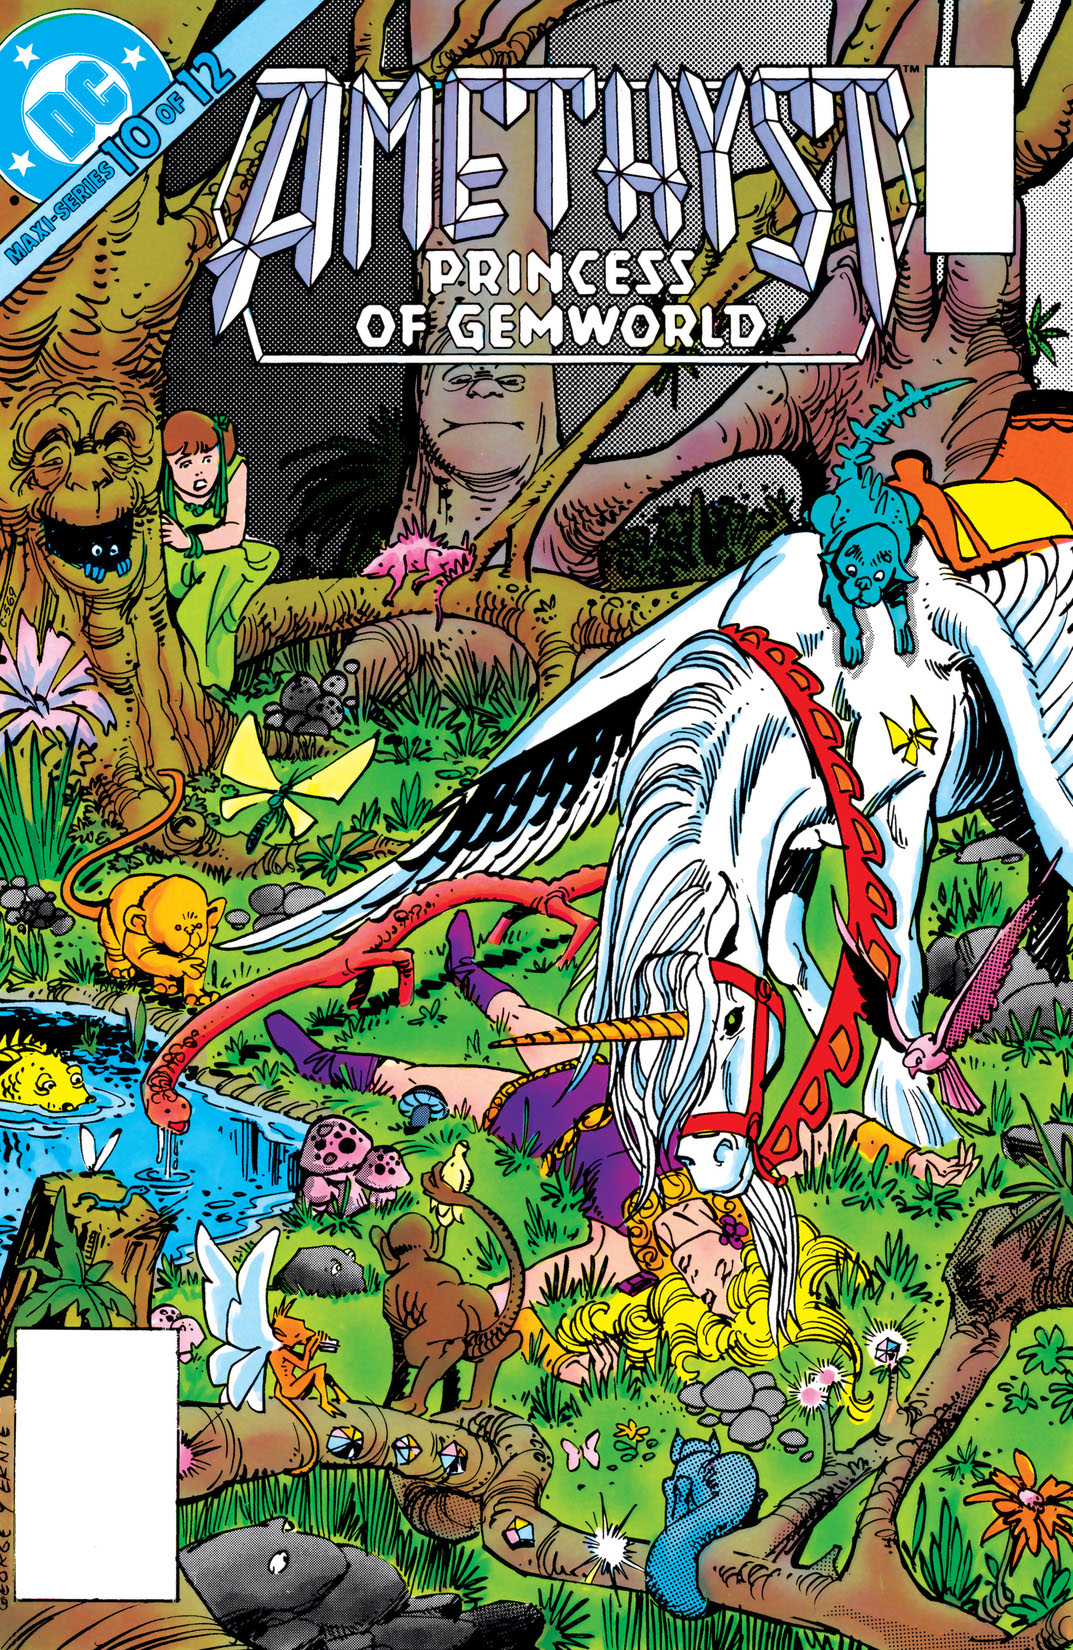 Amethyst: Princess of Gemworld (1983-) #10 preview images